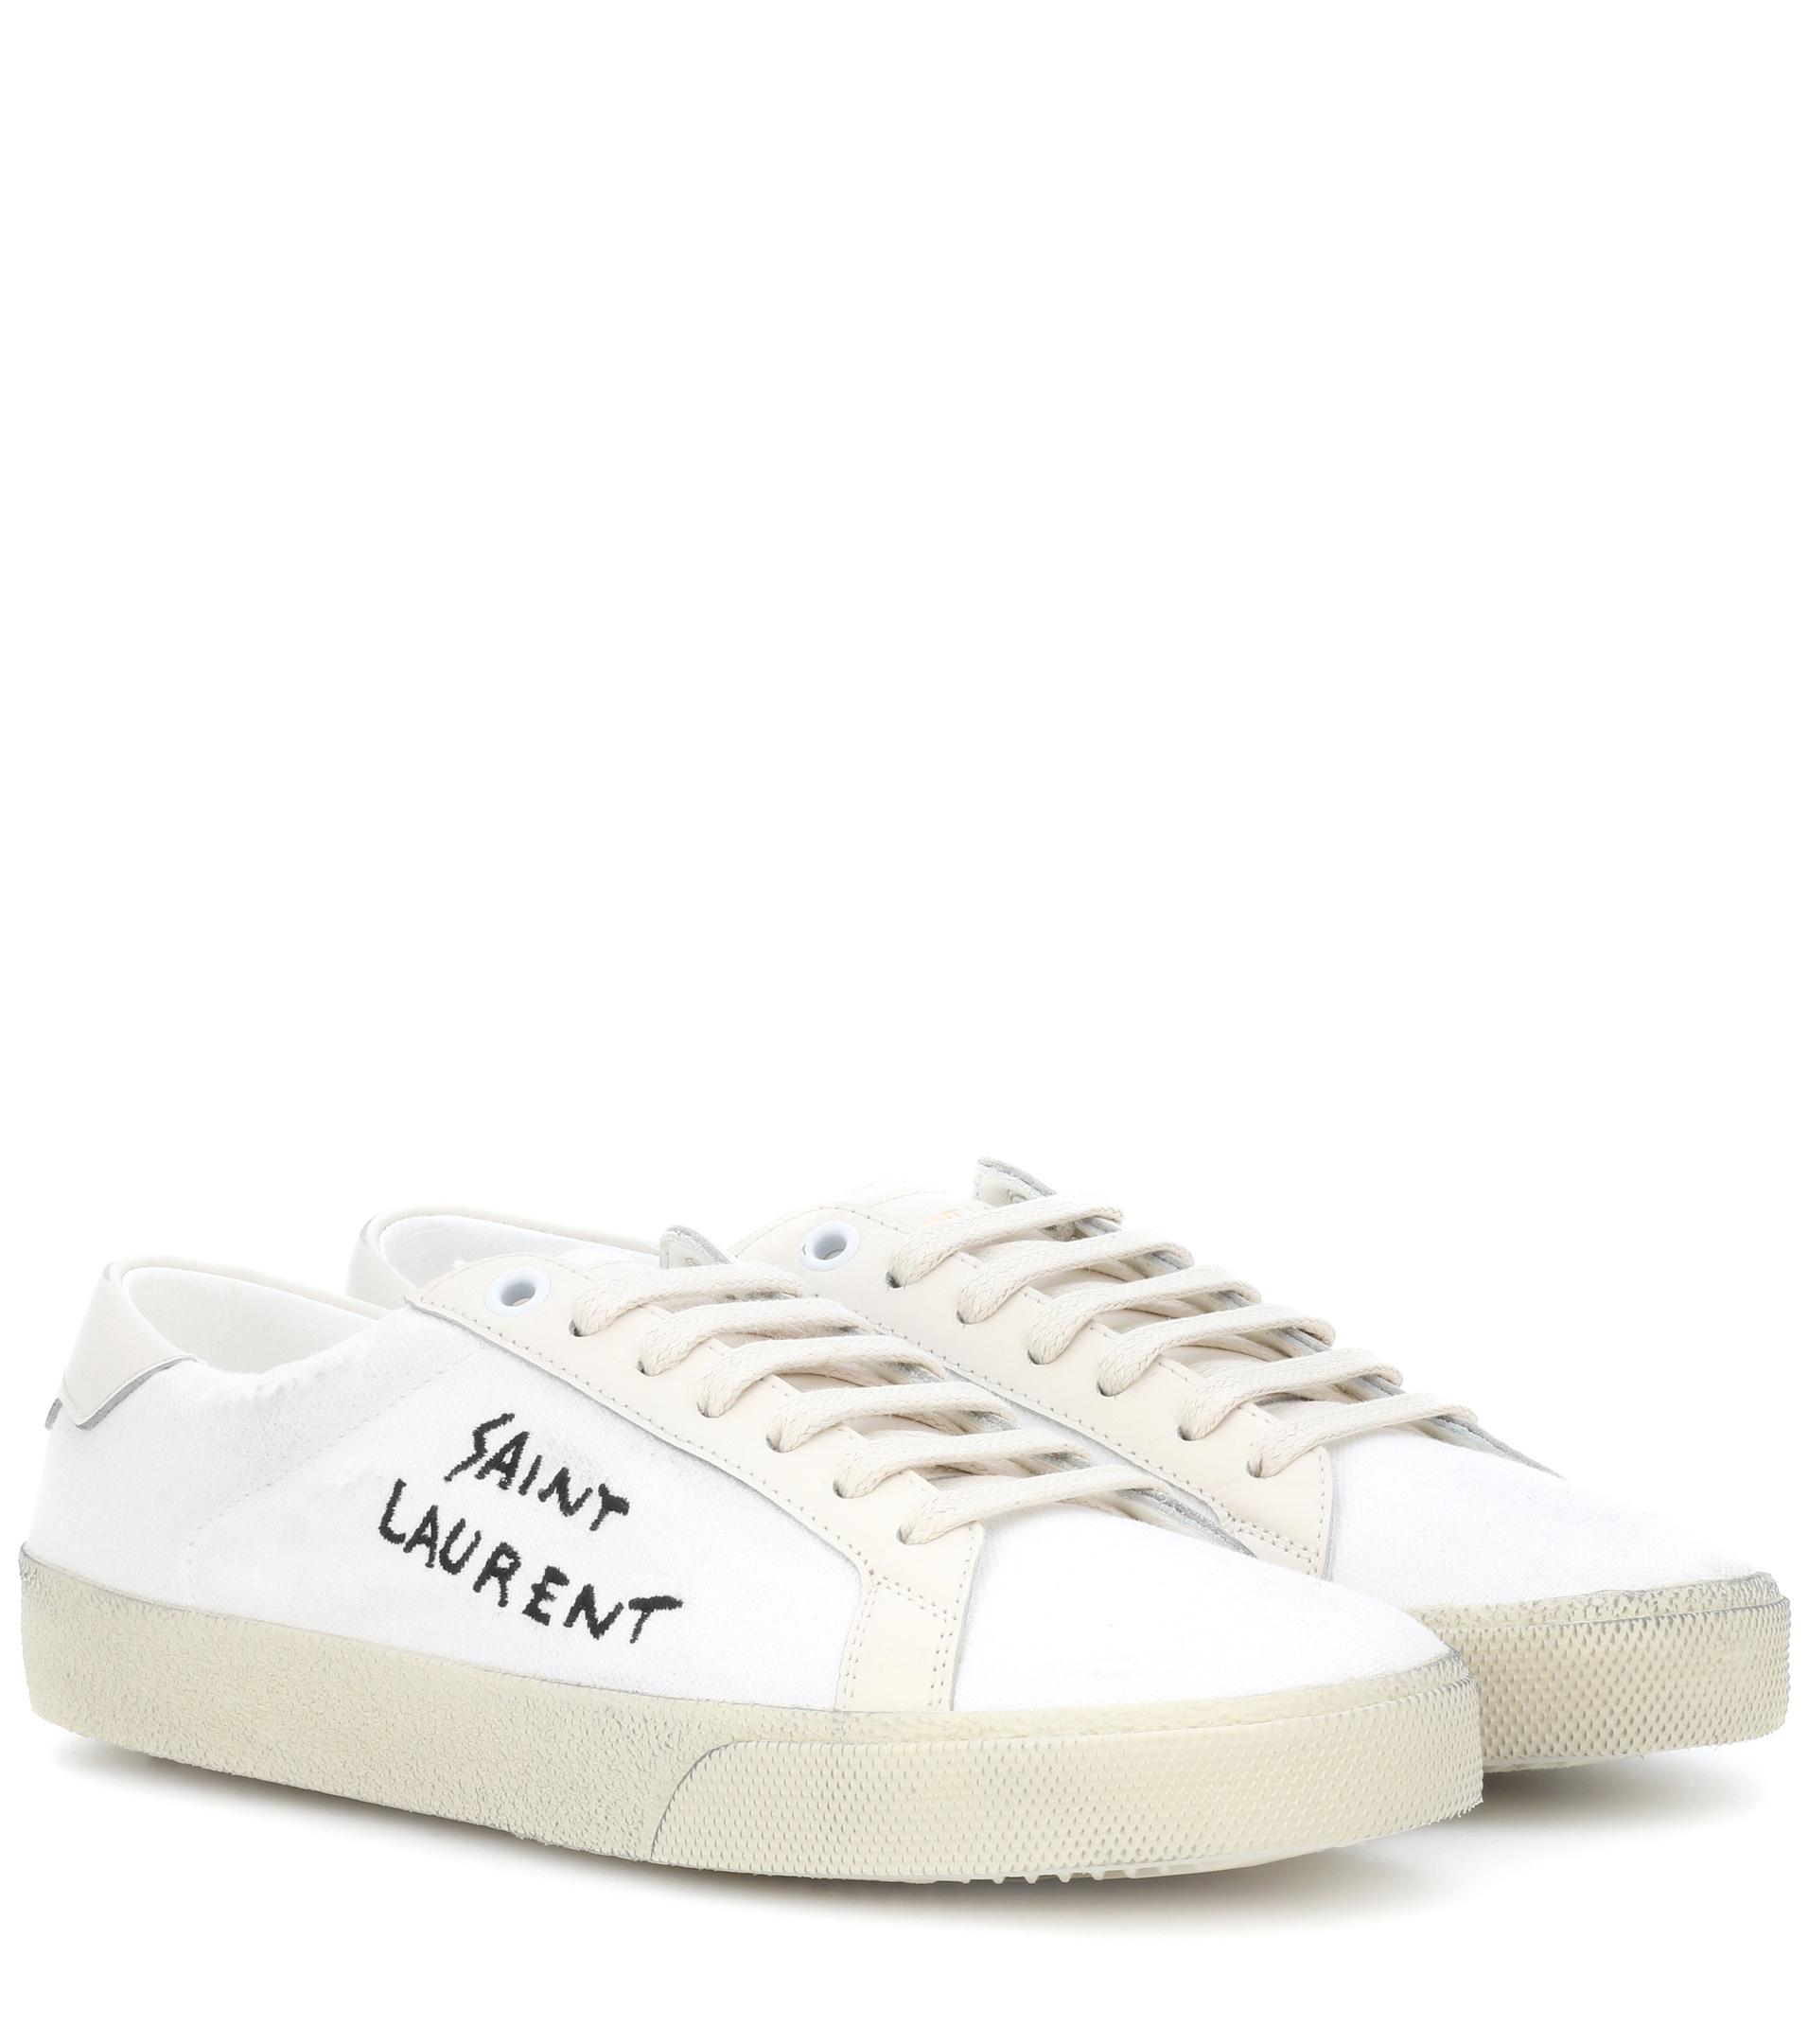 Saint Laurent Court Classic Sl/06 Sneakers in White - Lyst